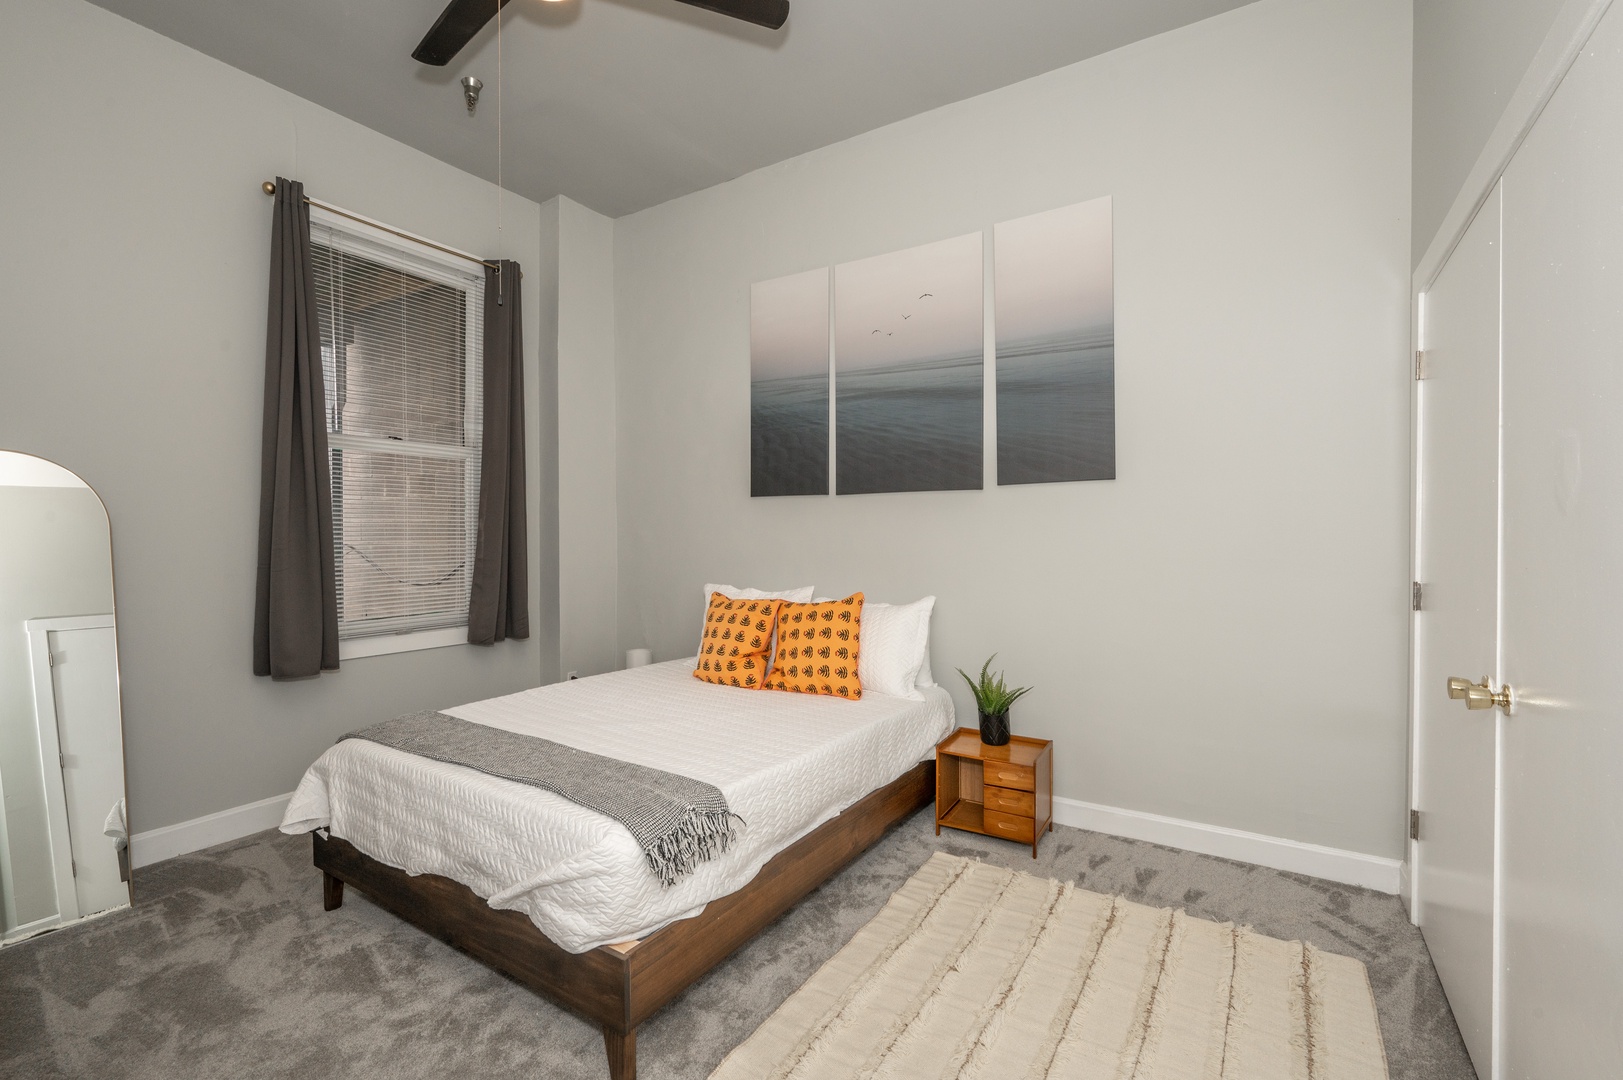 Get away from it all in your Queen Bedroom with Smart TV and Ceiling Fan